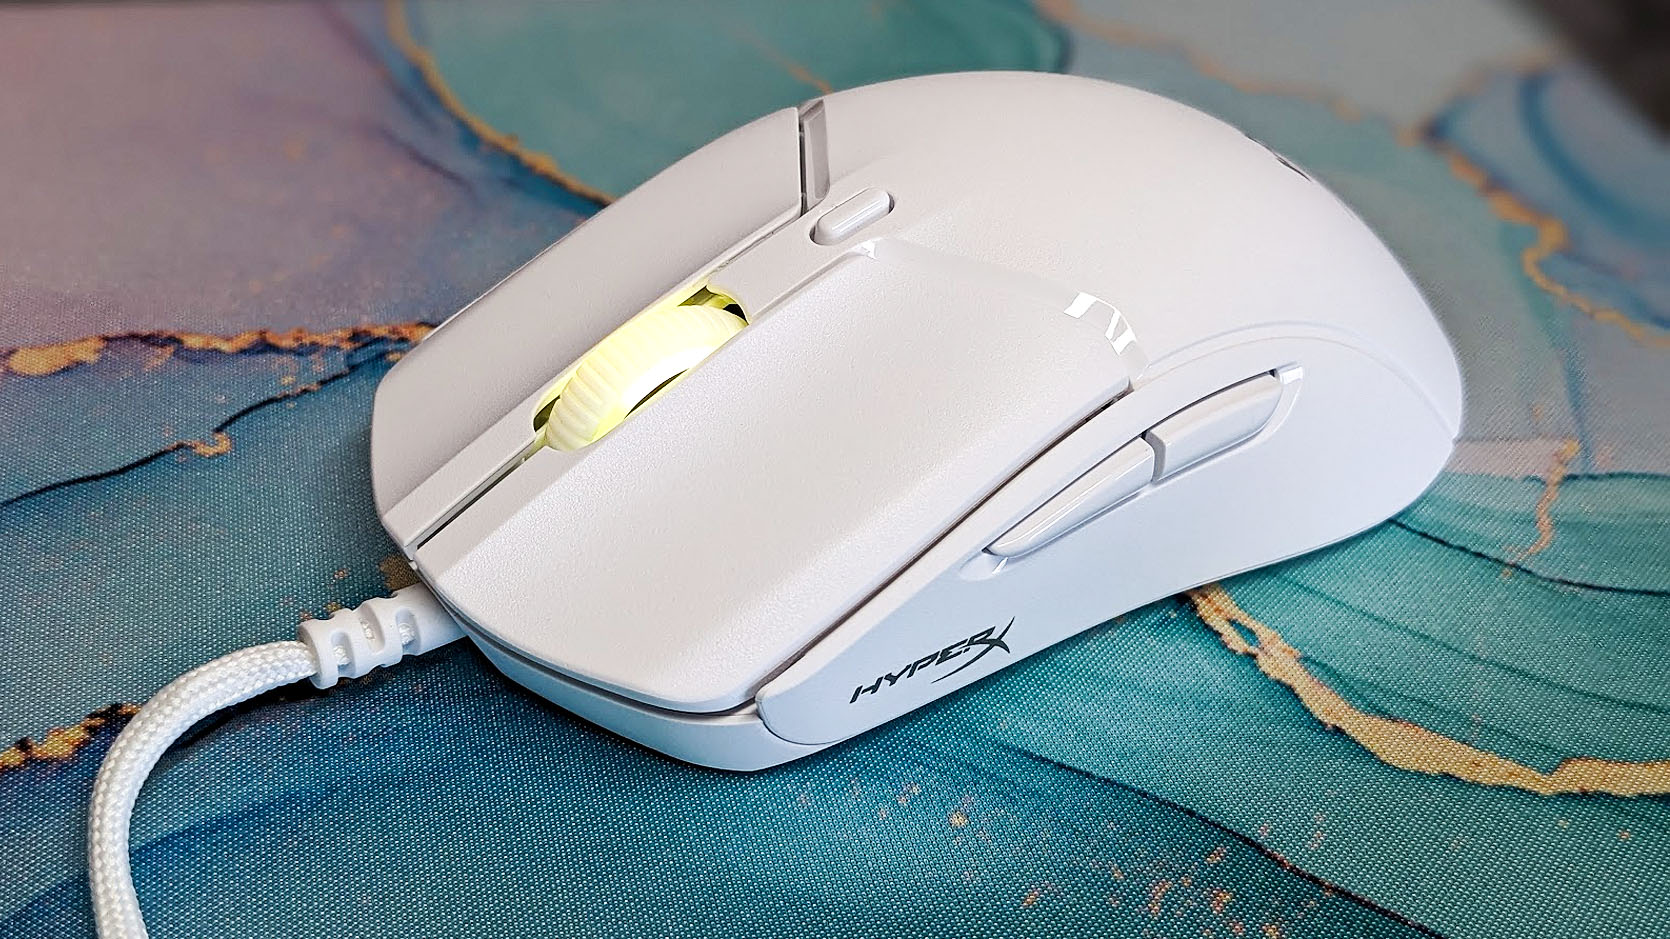 HyperX Pulsefire Haste 2 gaming mouse review: Excellent